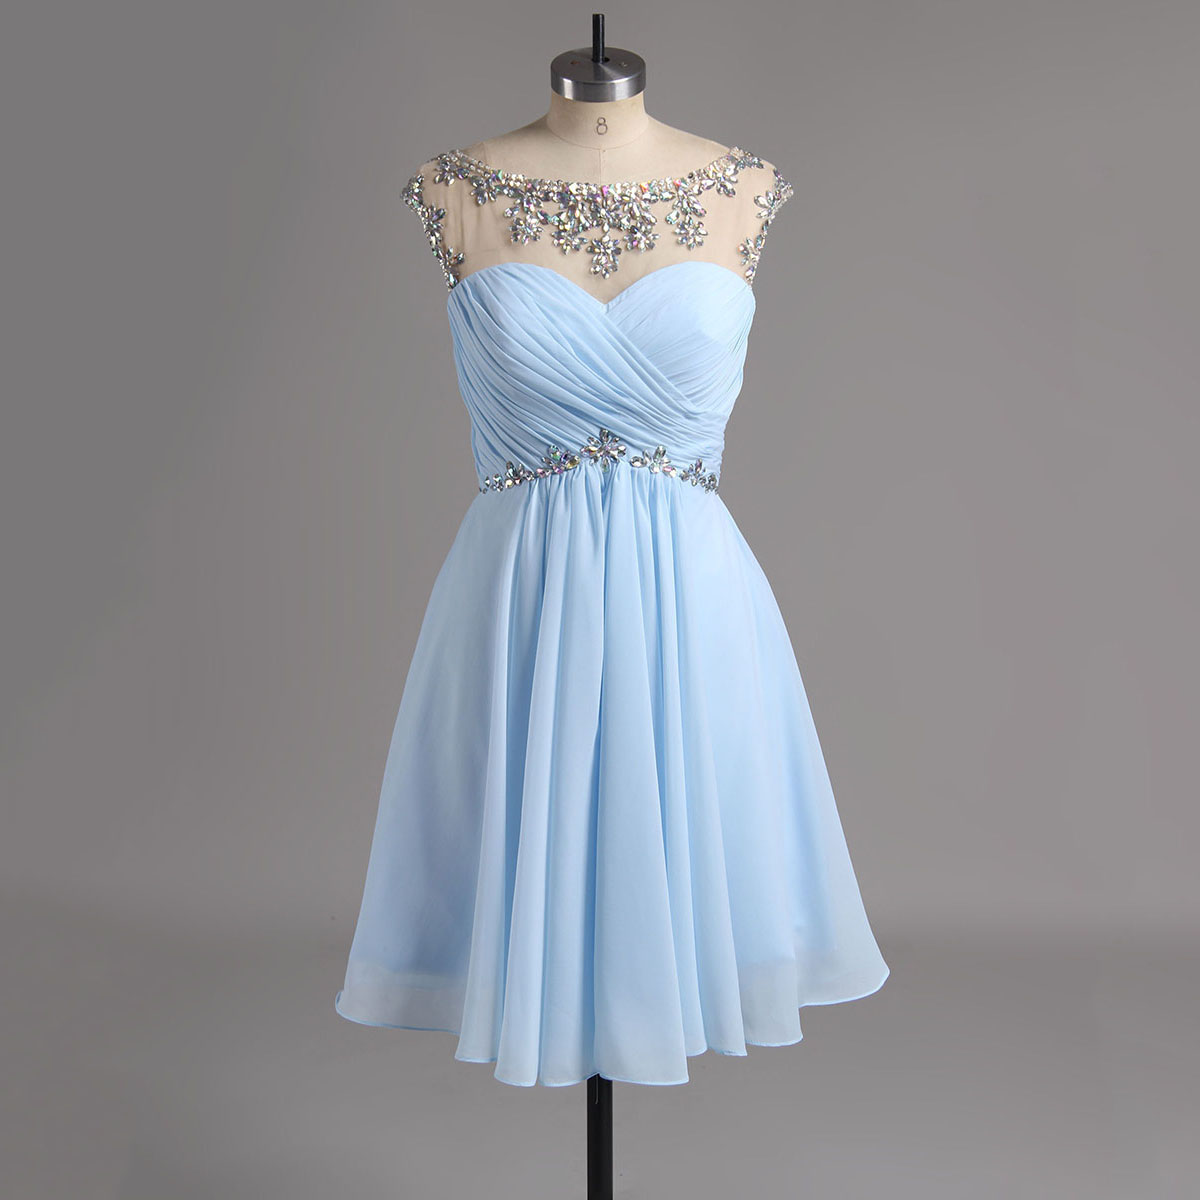 Cap Sleeve Illusion Neck Homecoming Dresses, Light Blue See-through Homecoming Dresses With Ruching Detail, Low Back Homecoming Dresses